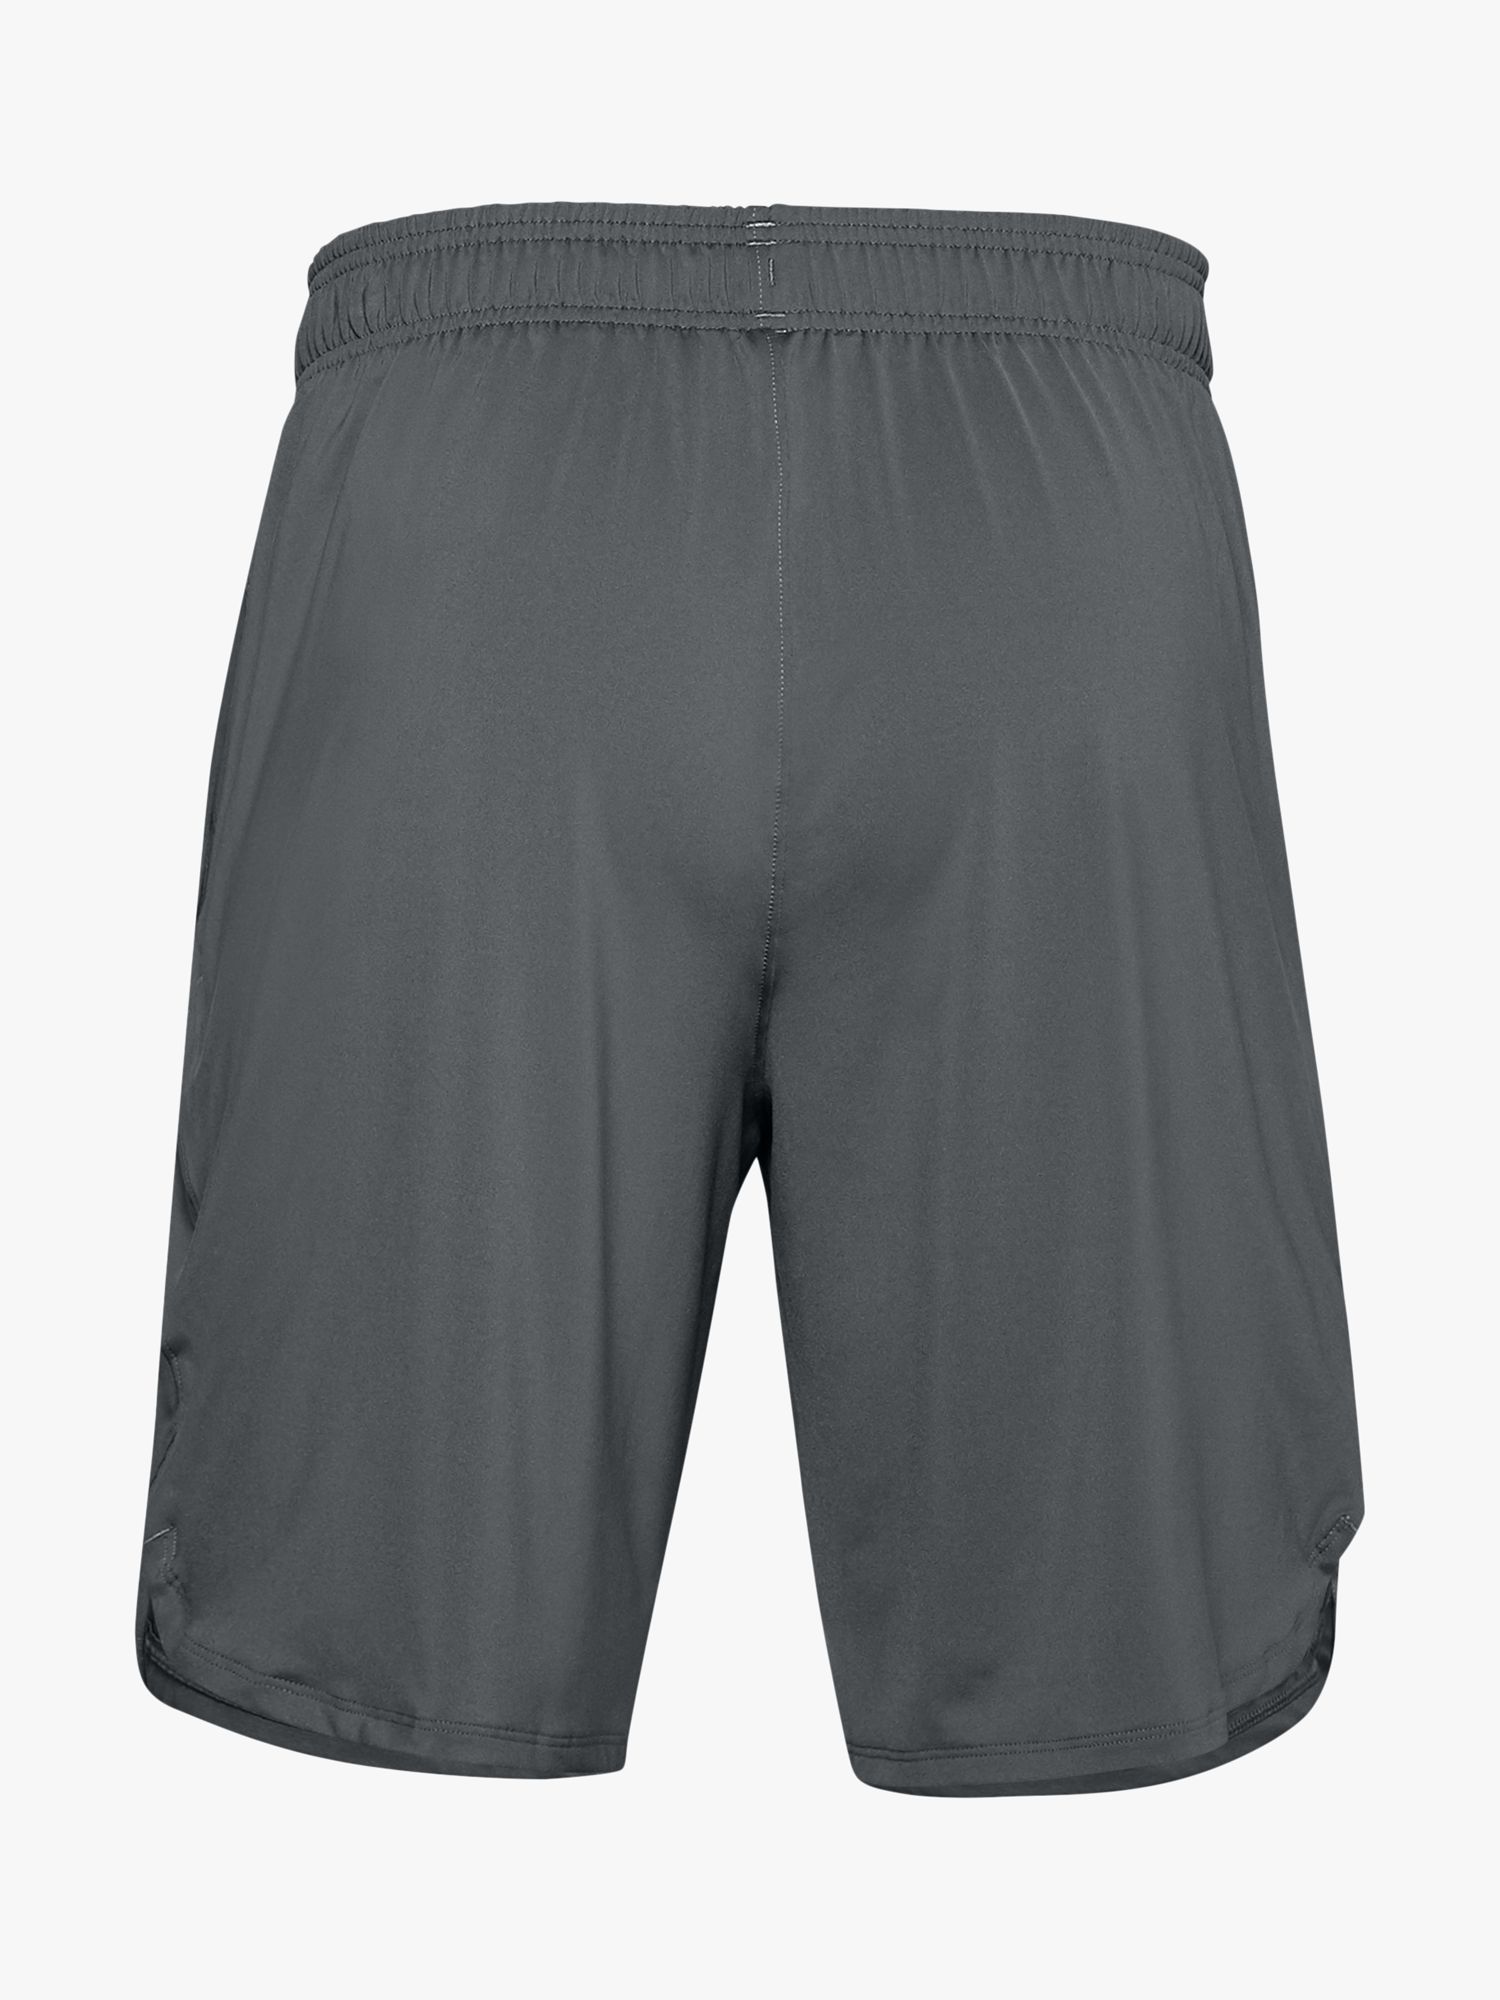 Under Armour Training Stretch Shorts, Pitch Grey at John Lewis & Partners